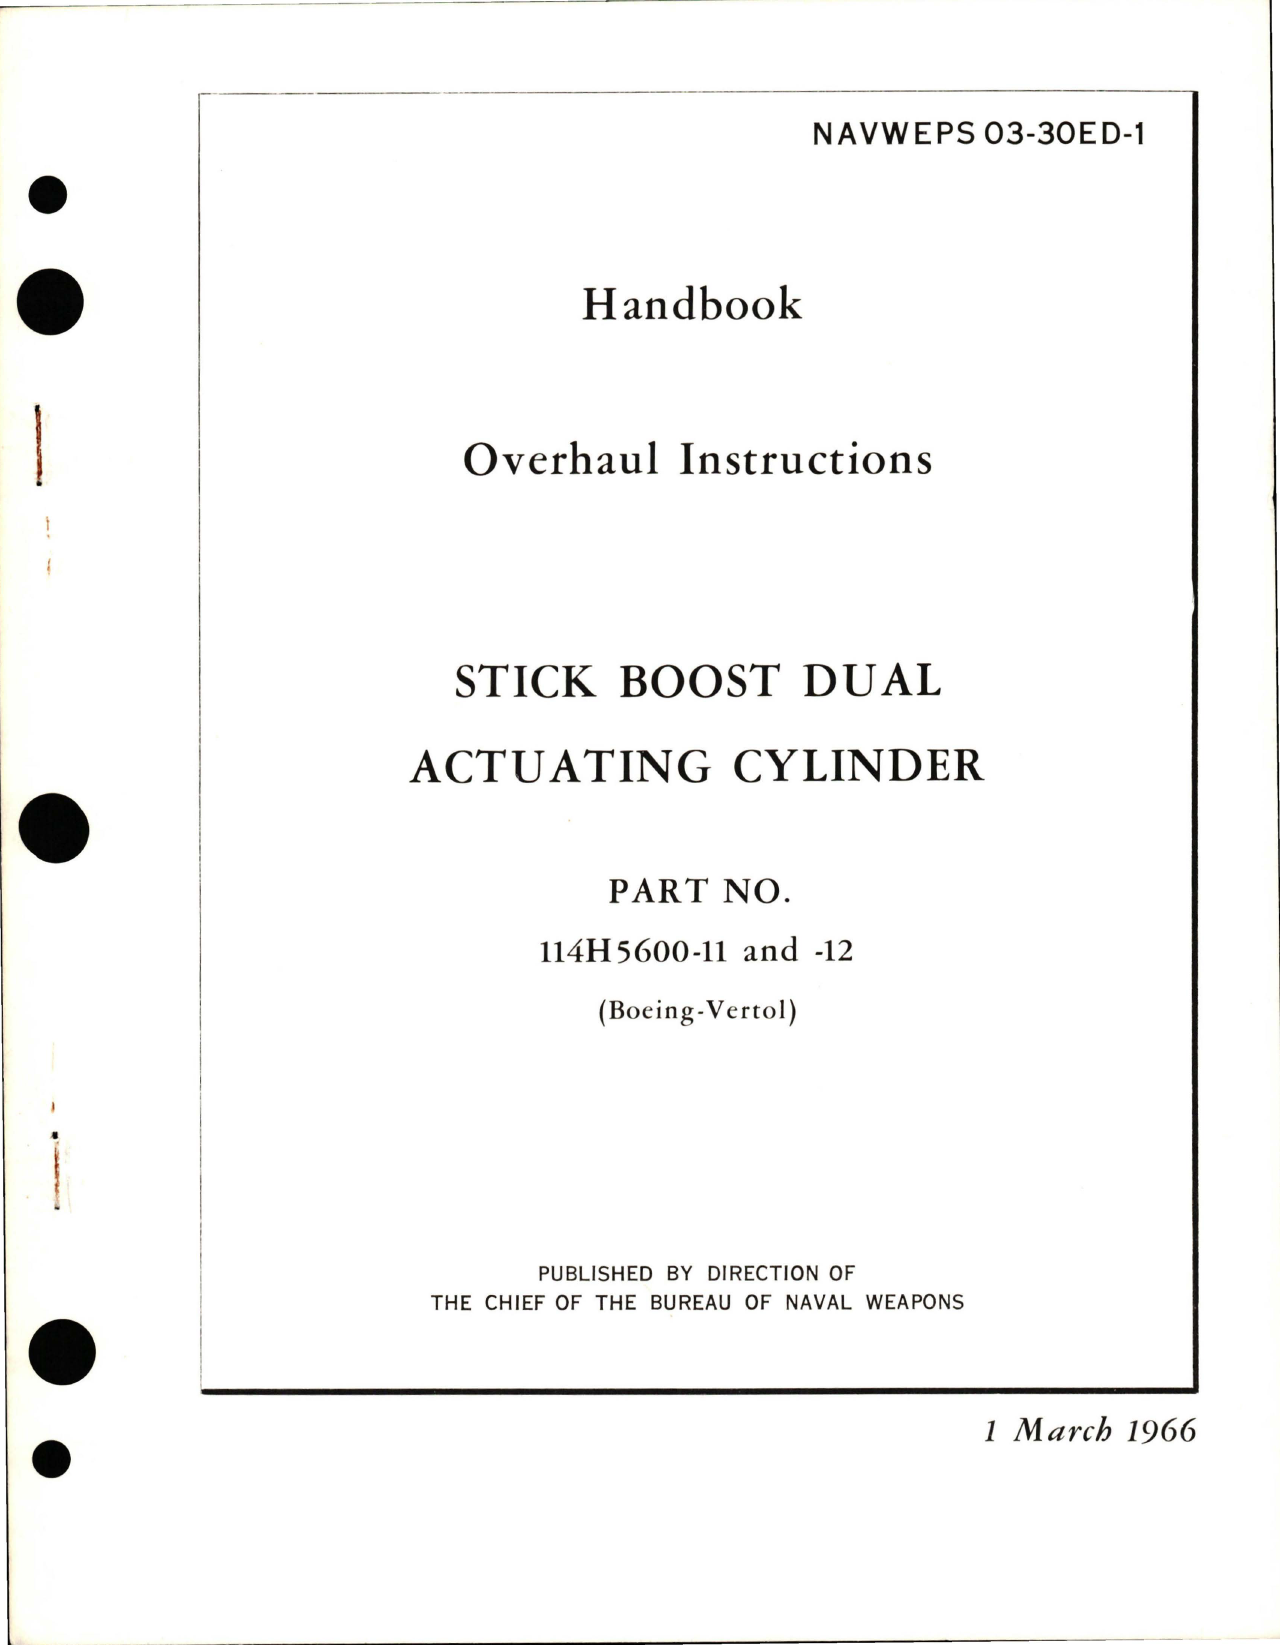 Sample page 1 from AirCorps Library document: Overhaul Instructions for Stick Boost Dual Actuating Cylinder - Part 114H5600-11 and 114H5600-12